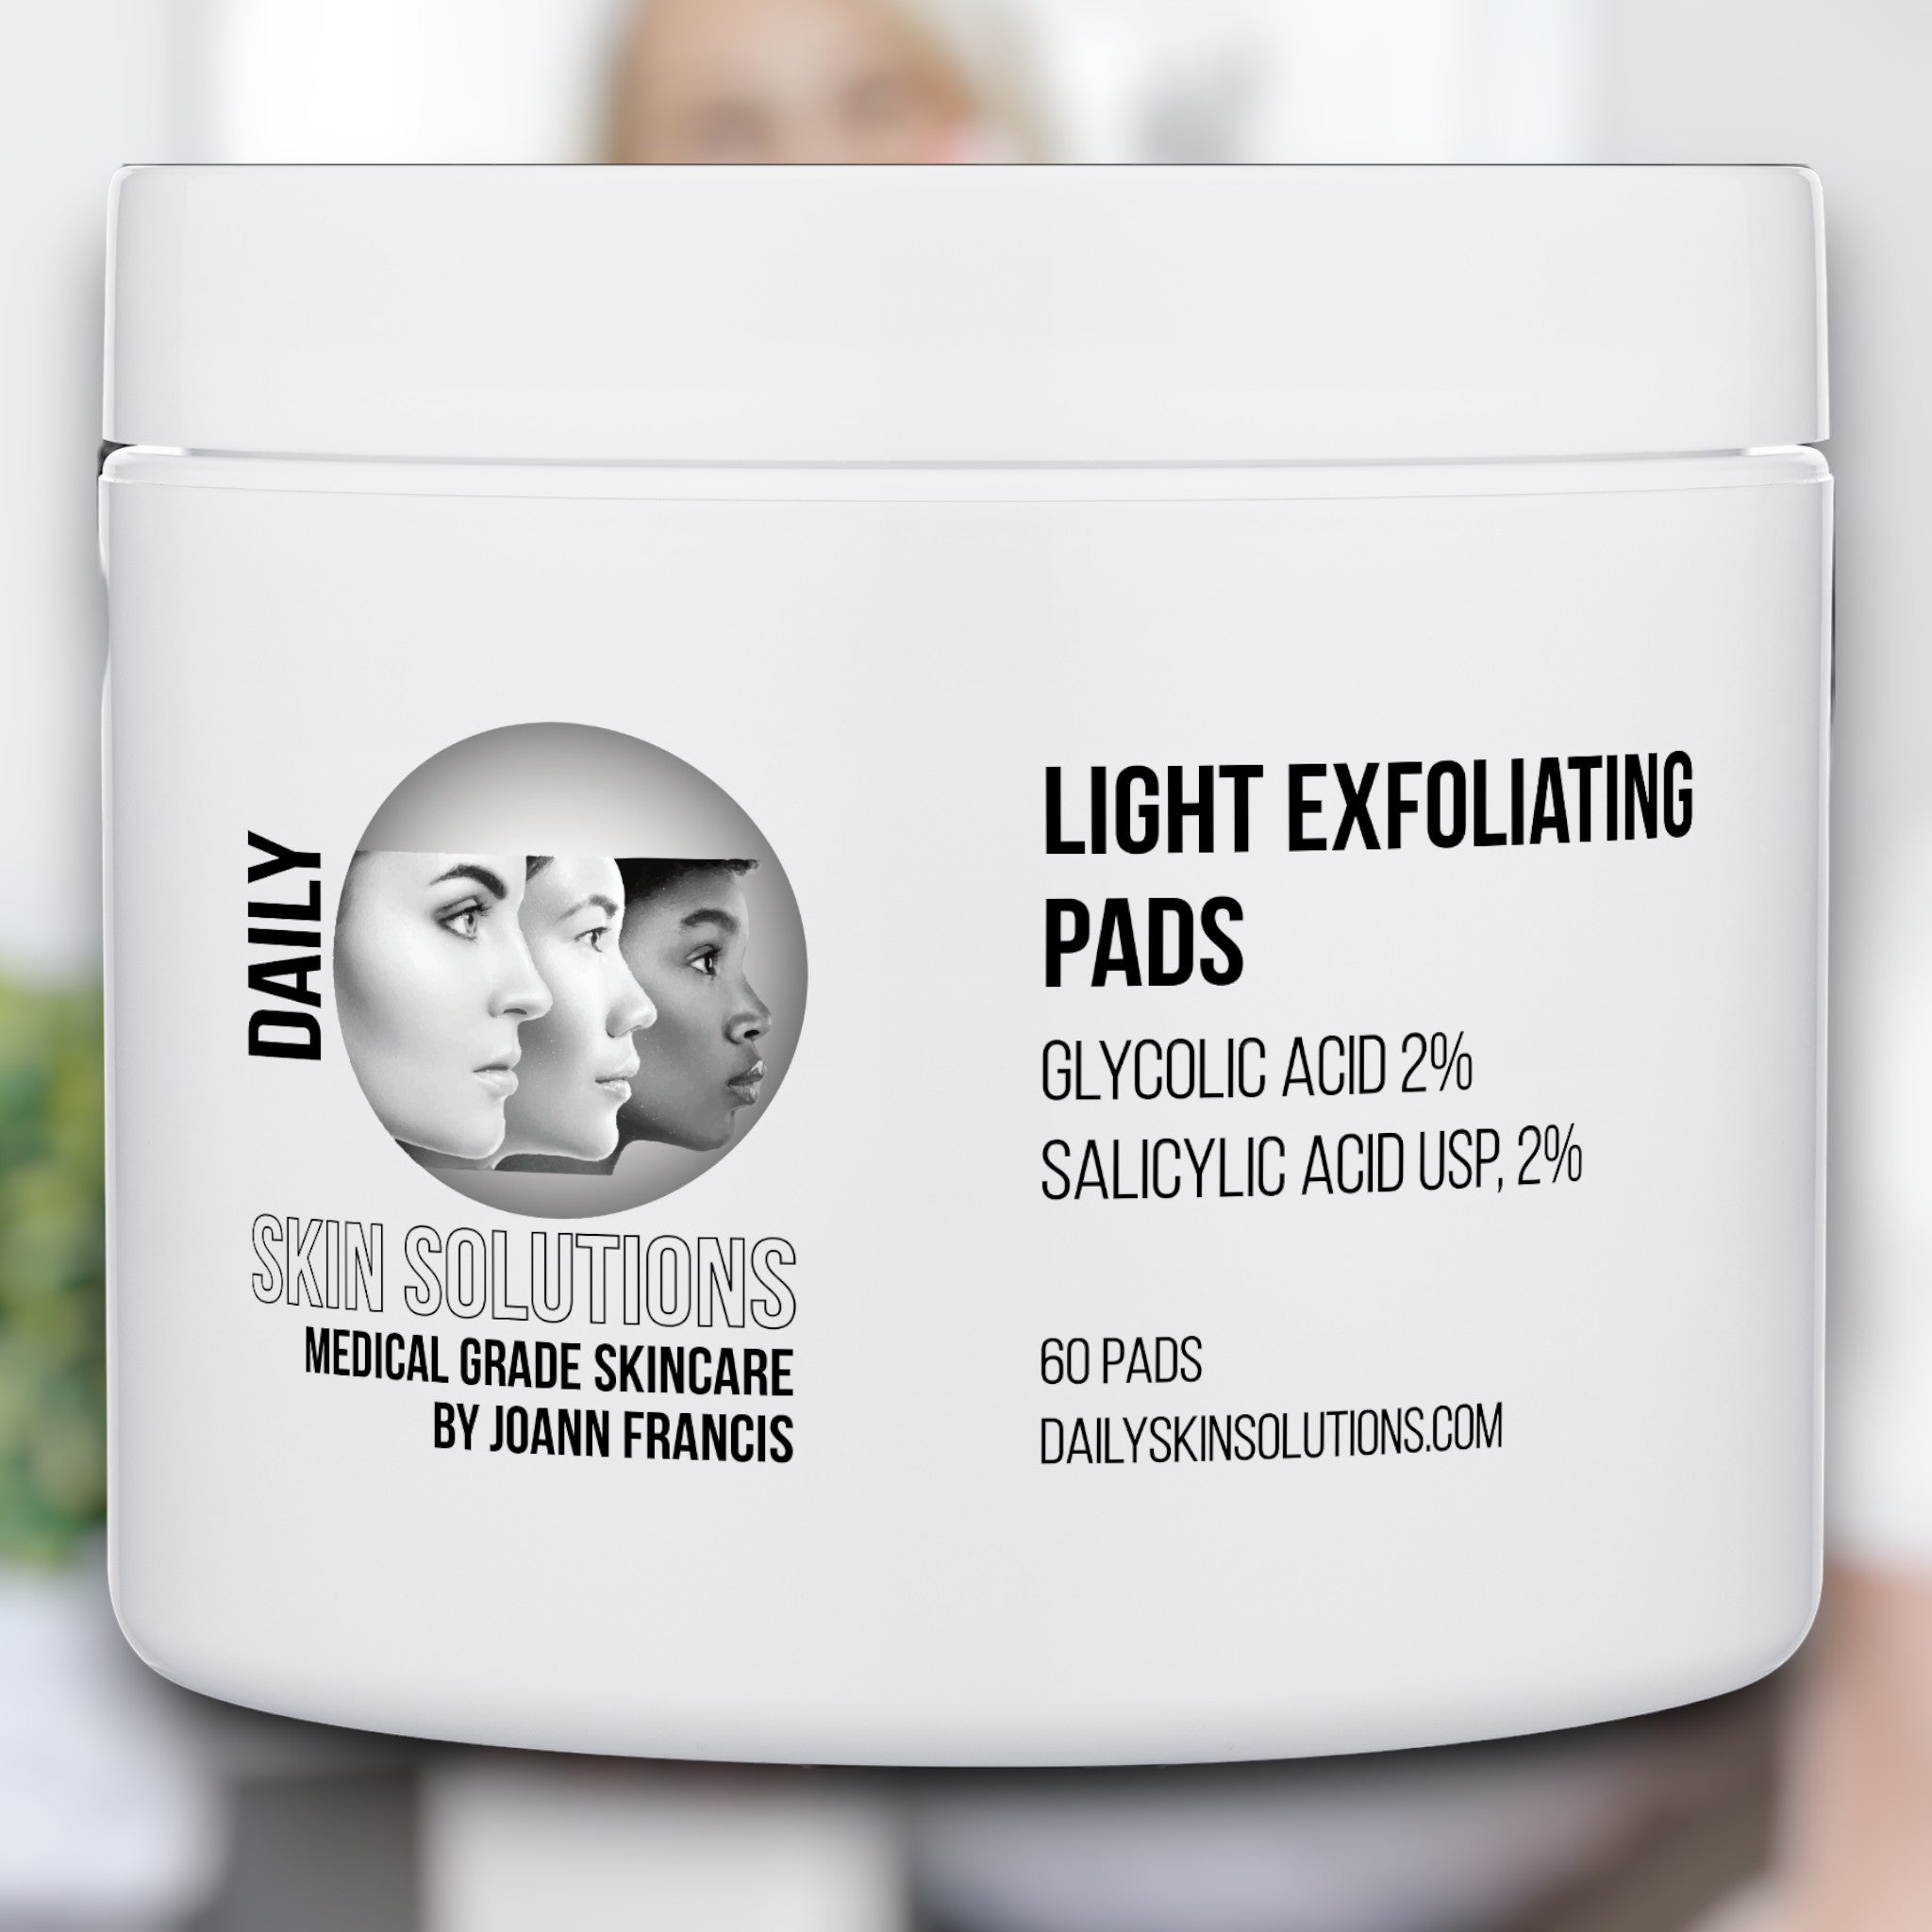 Light Exfoliating Pads by Daily Skin Solutions